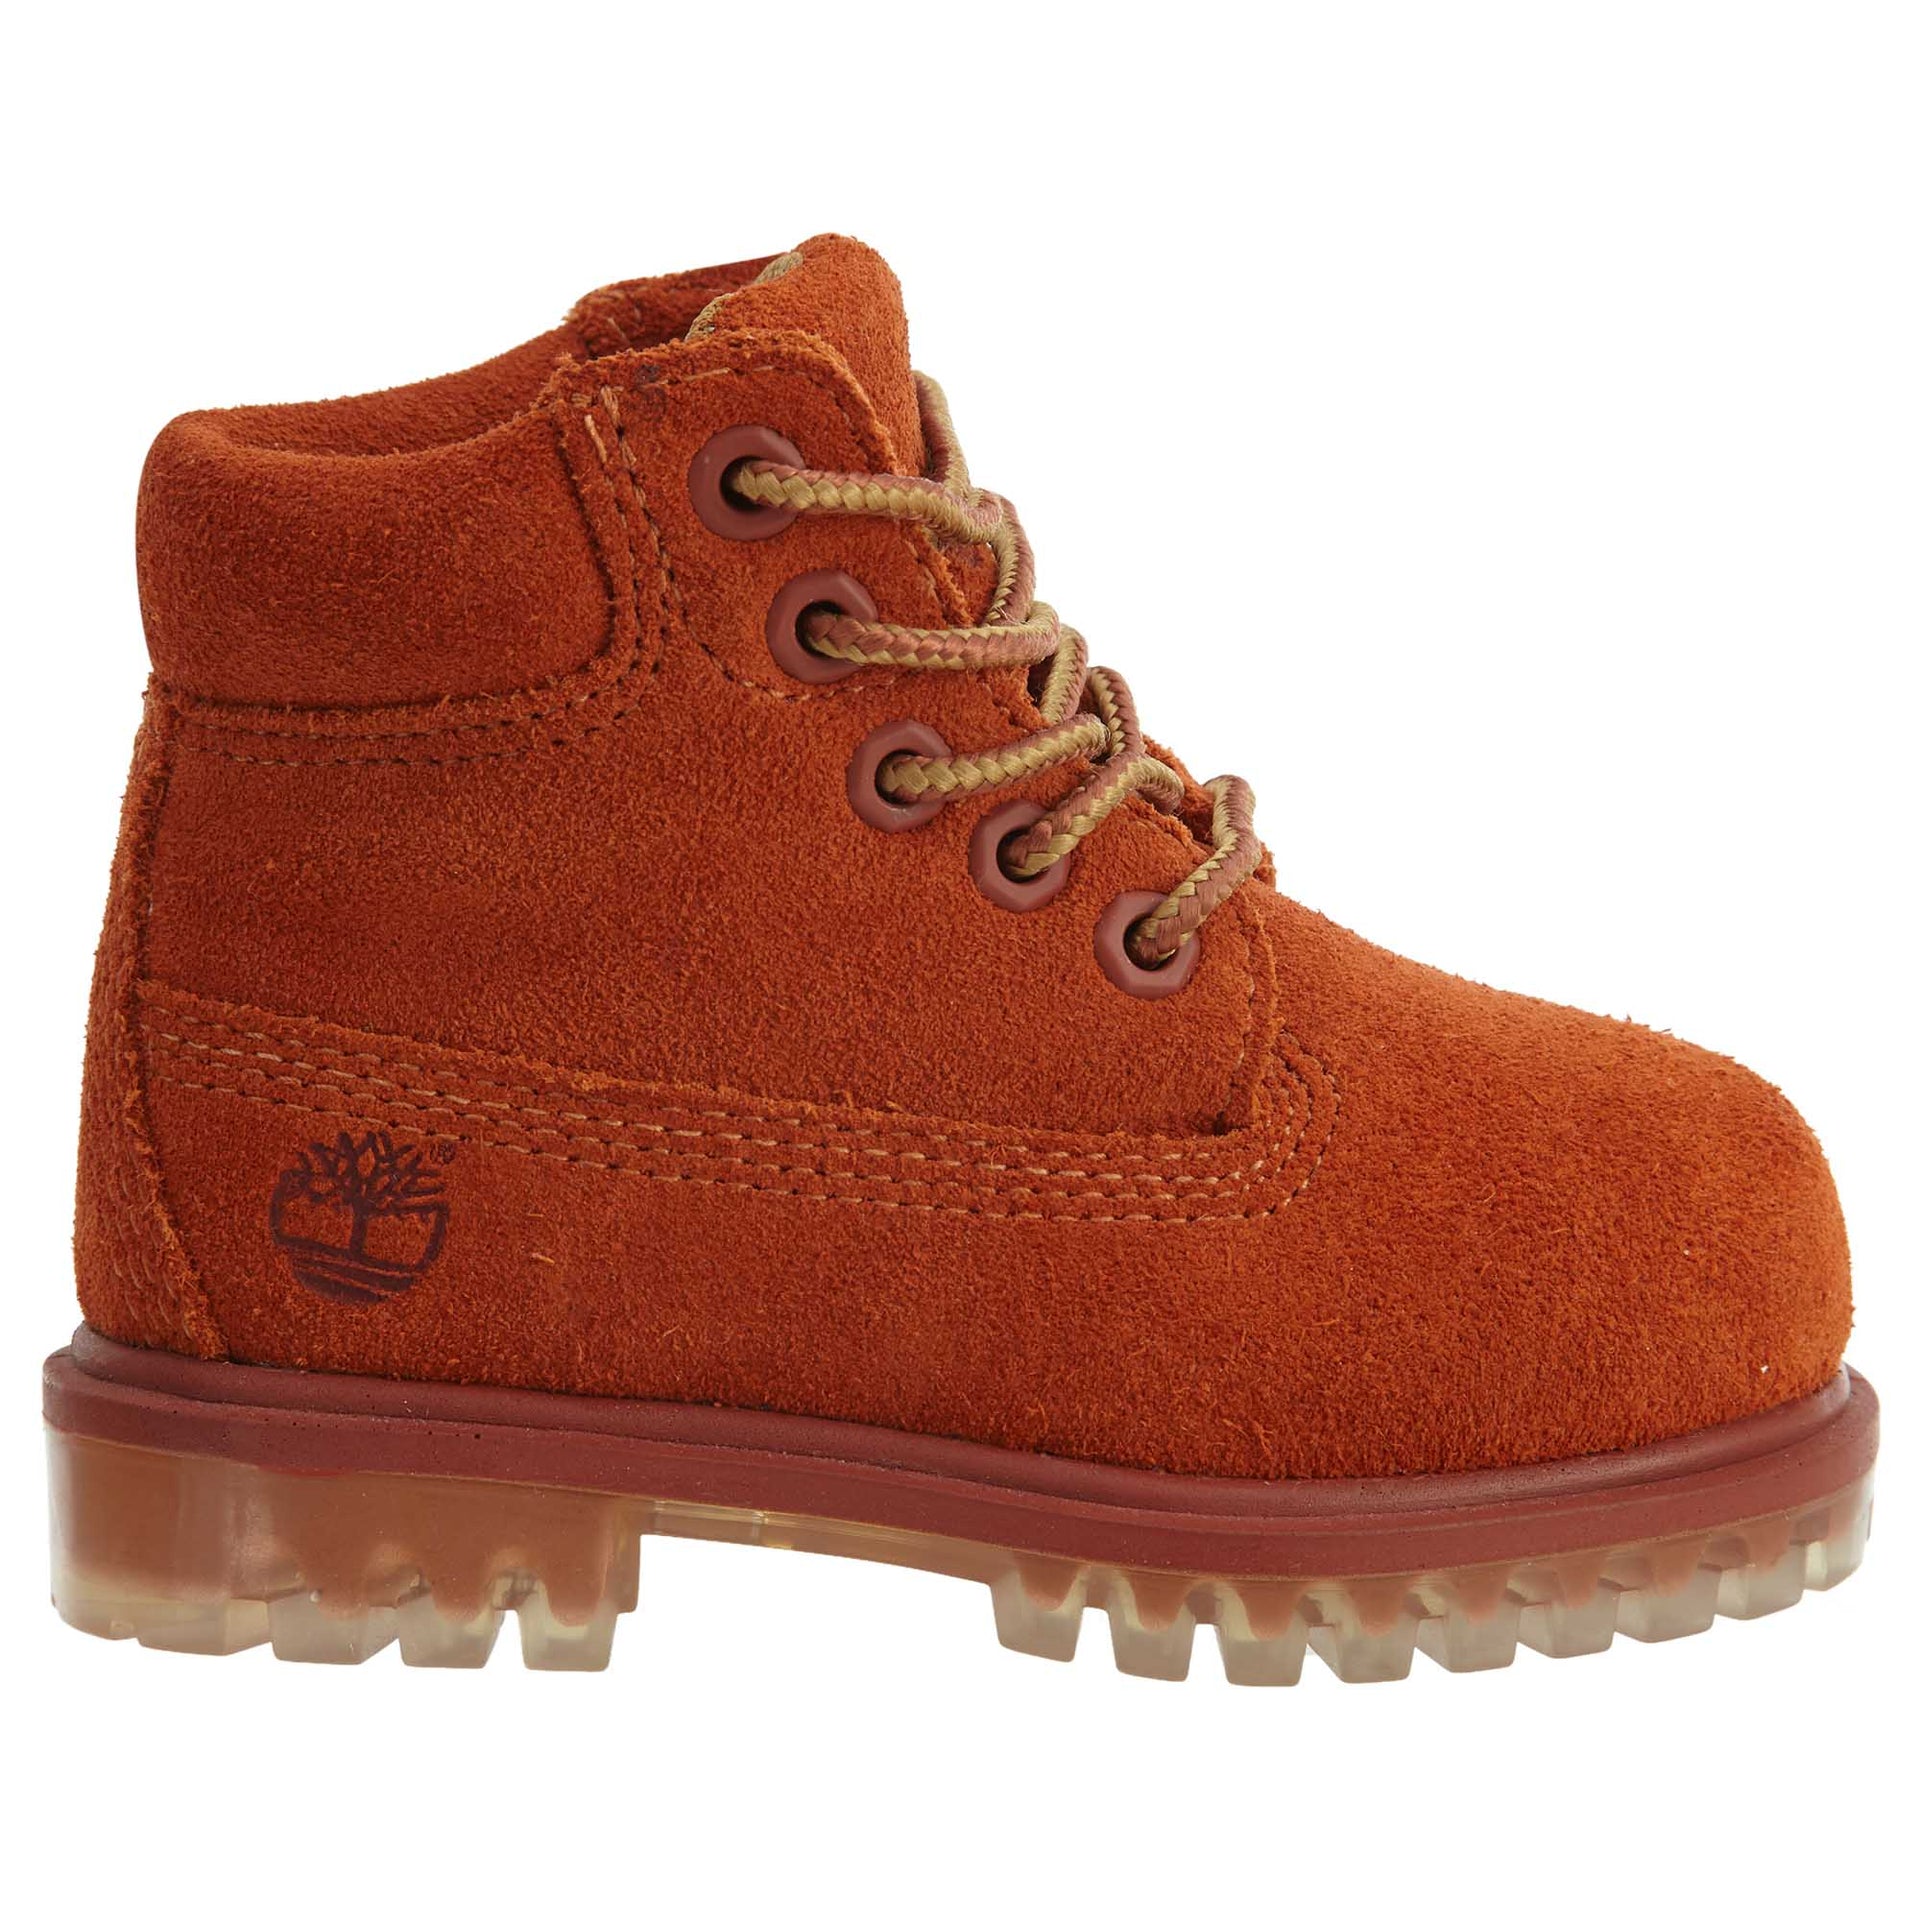 Timberland 6" Premium Boot Toddlers Style : Tb0a1blq